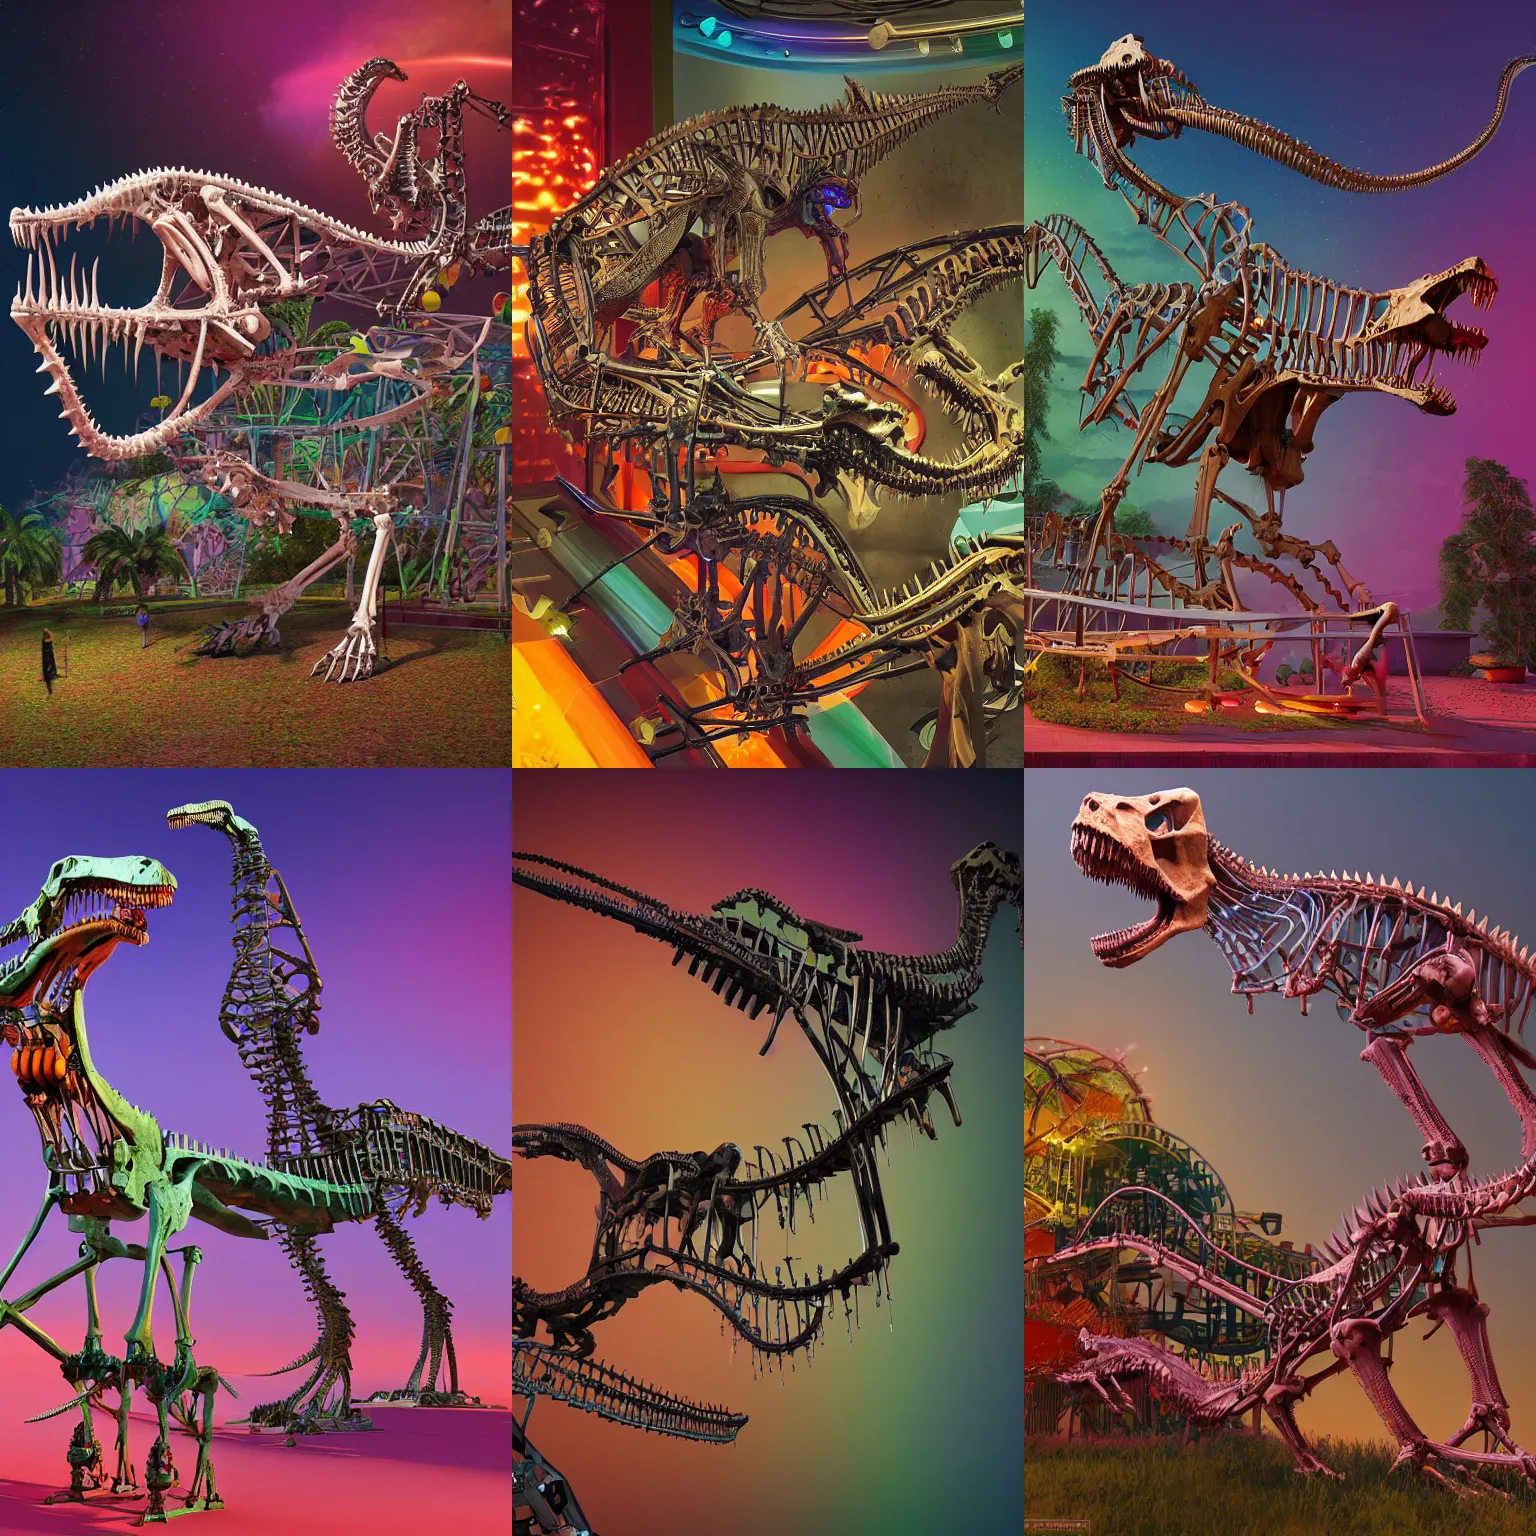 Prompt: Simple bionic exploded drawing dinosaur skeleton sculpture made from rollercoaster, with colorfull jellybeans organs, by david lachapelle, by angus mckie, by rhads, in a dark empty black studio hollow, c4d, at night, rimlight, rimight, rimlight, c4d, blender donut tutorial, octane